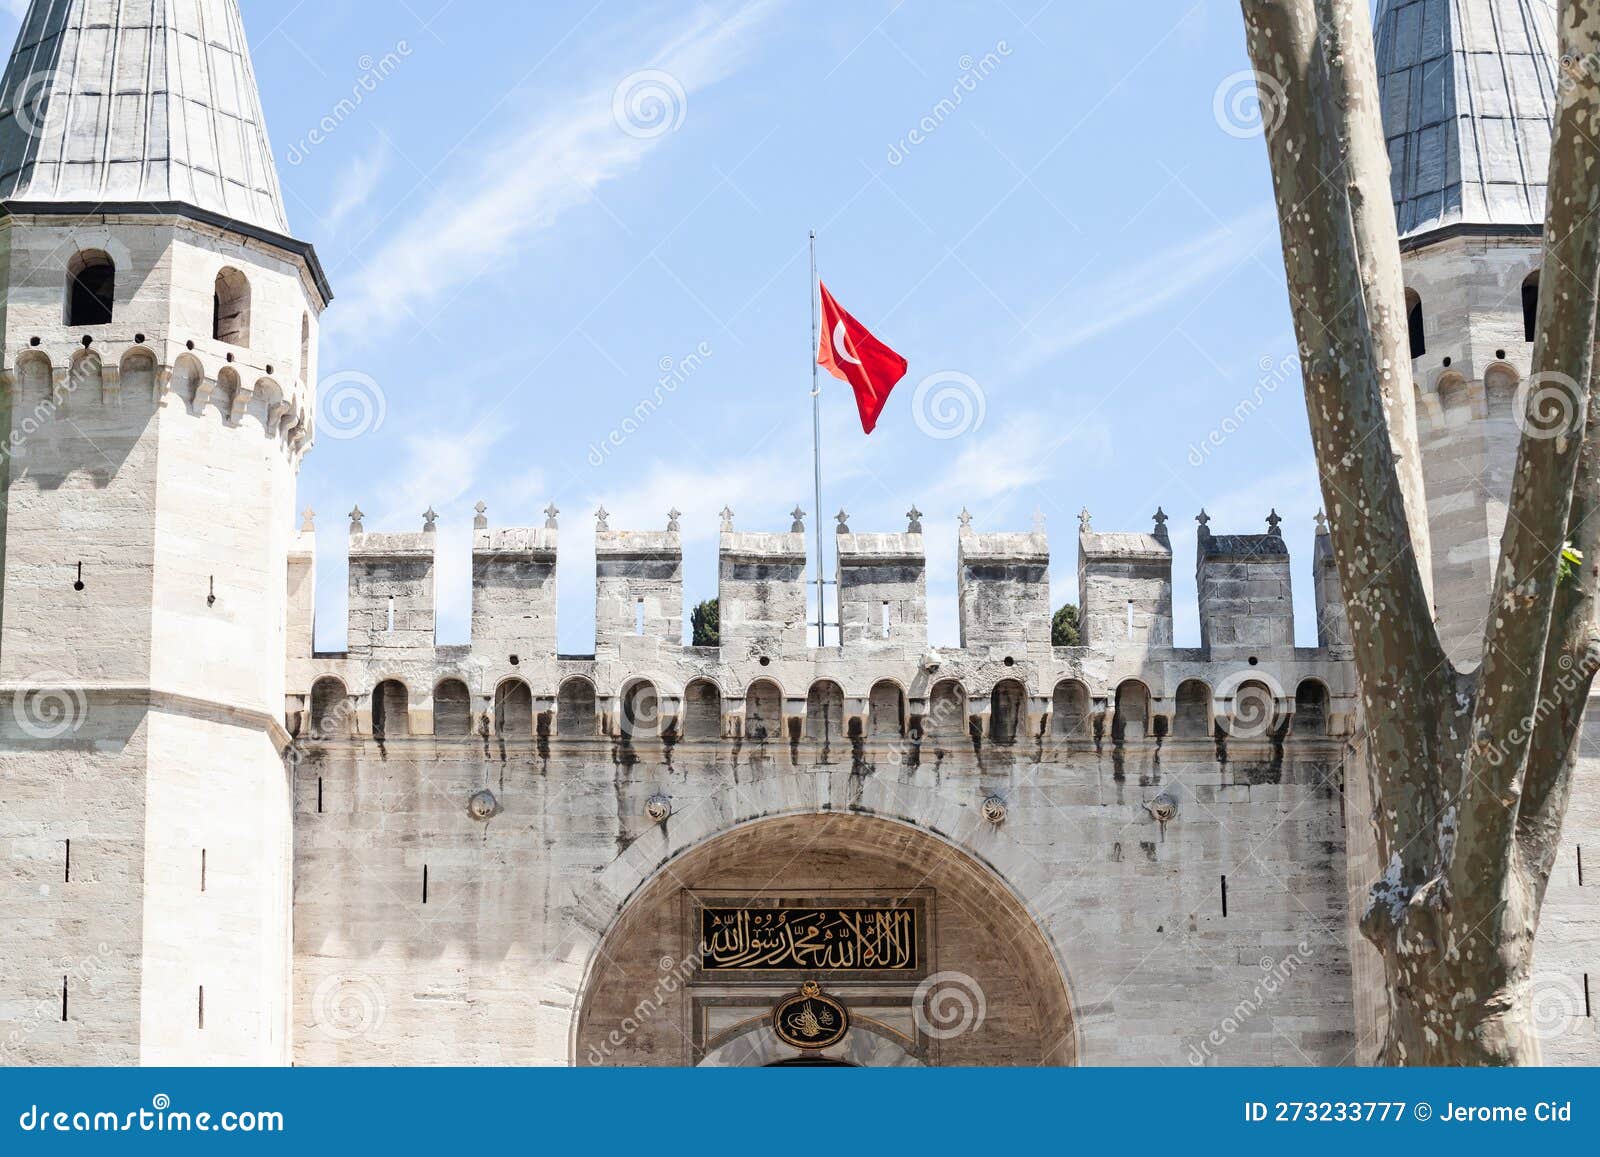 istanbul, turkey - may 22, 2022: entrance to topkapi palace from the gate of salutation, also known as middle gate or orta kapi.